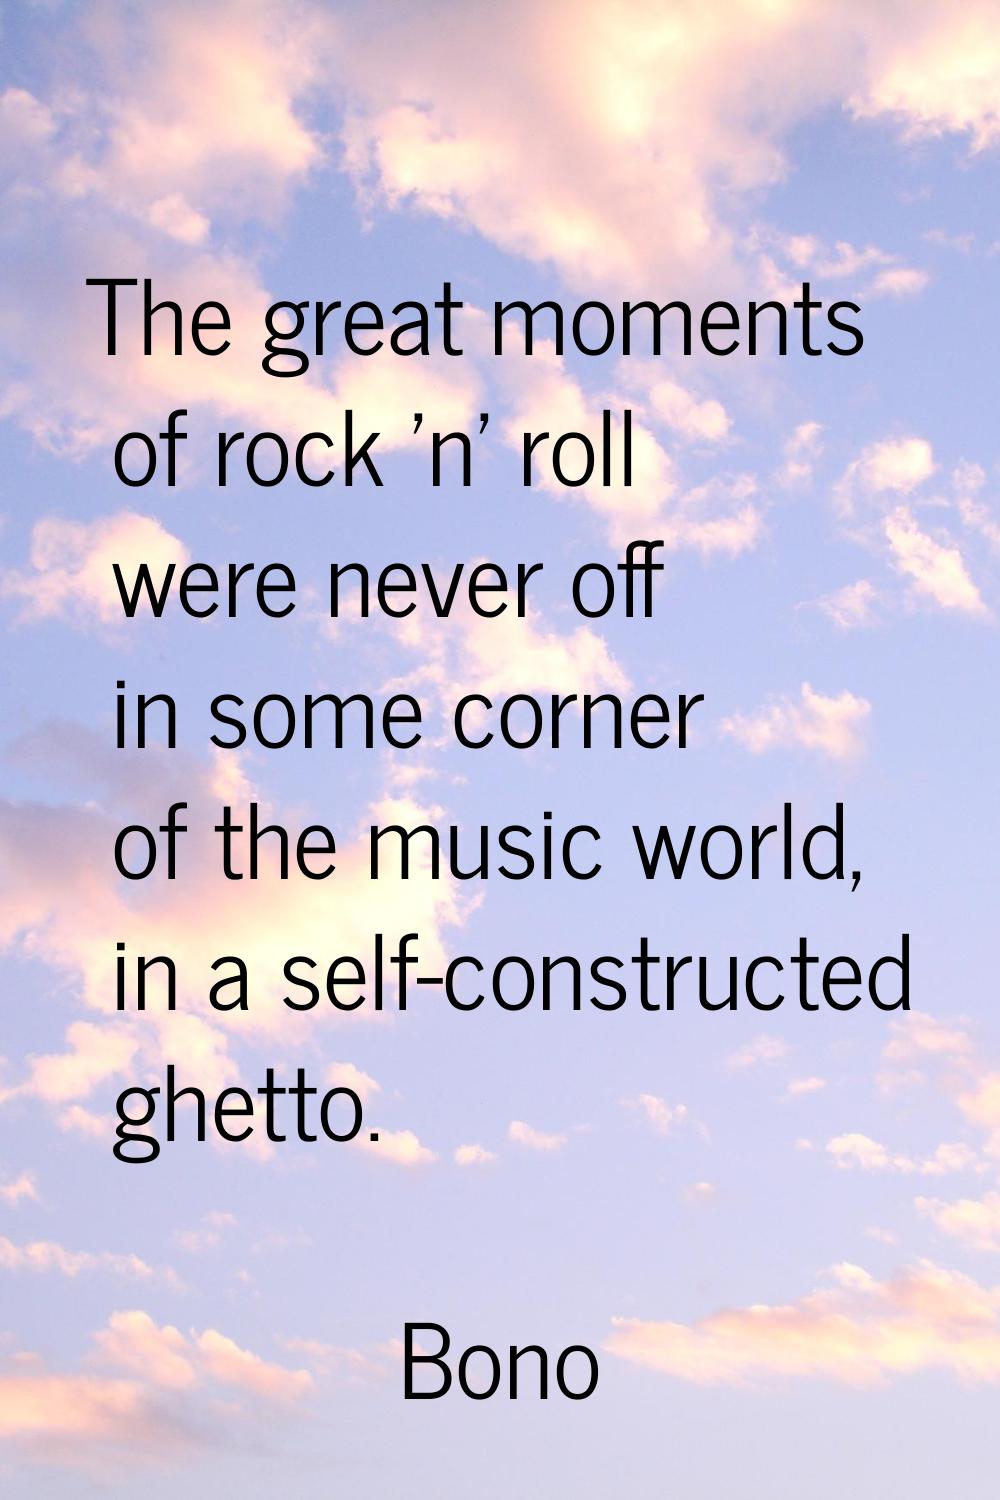 The great moments of rock 'n' roll were never off in some corner of the music world, in a self-cons